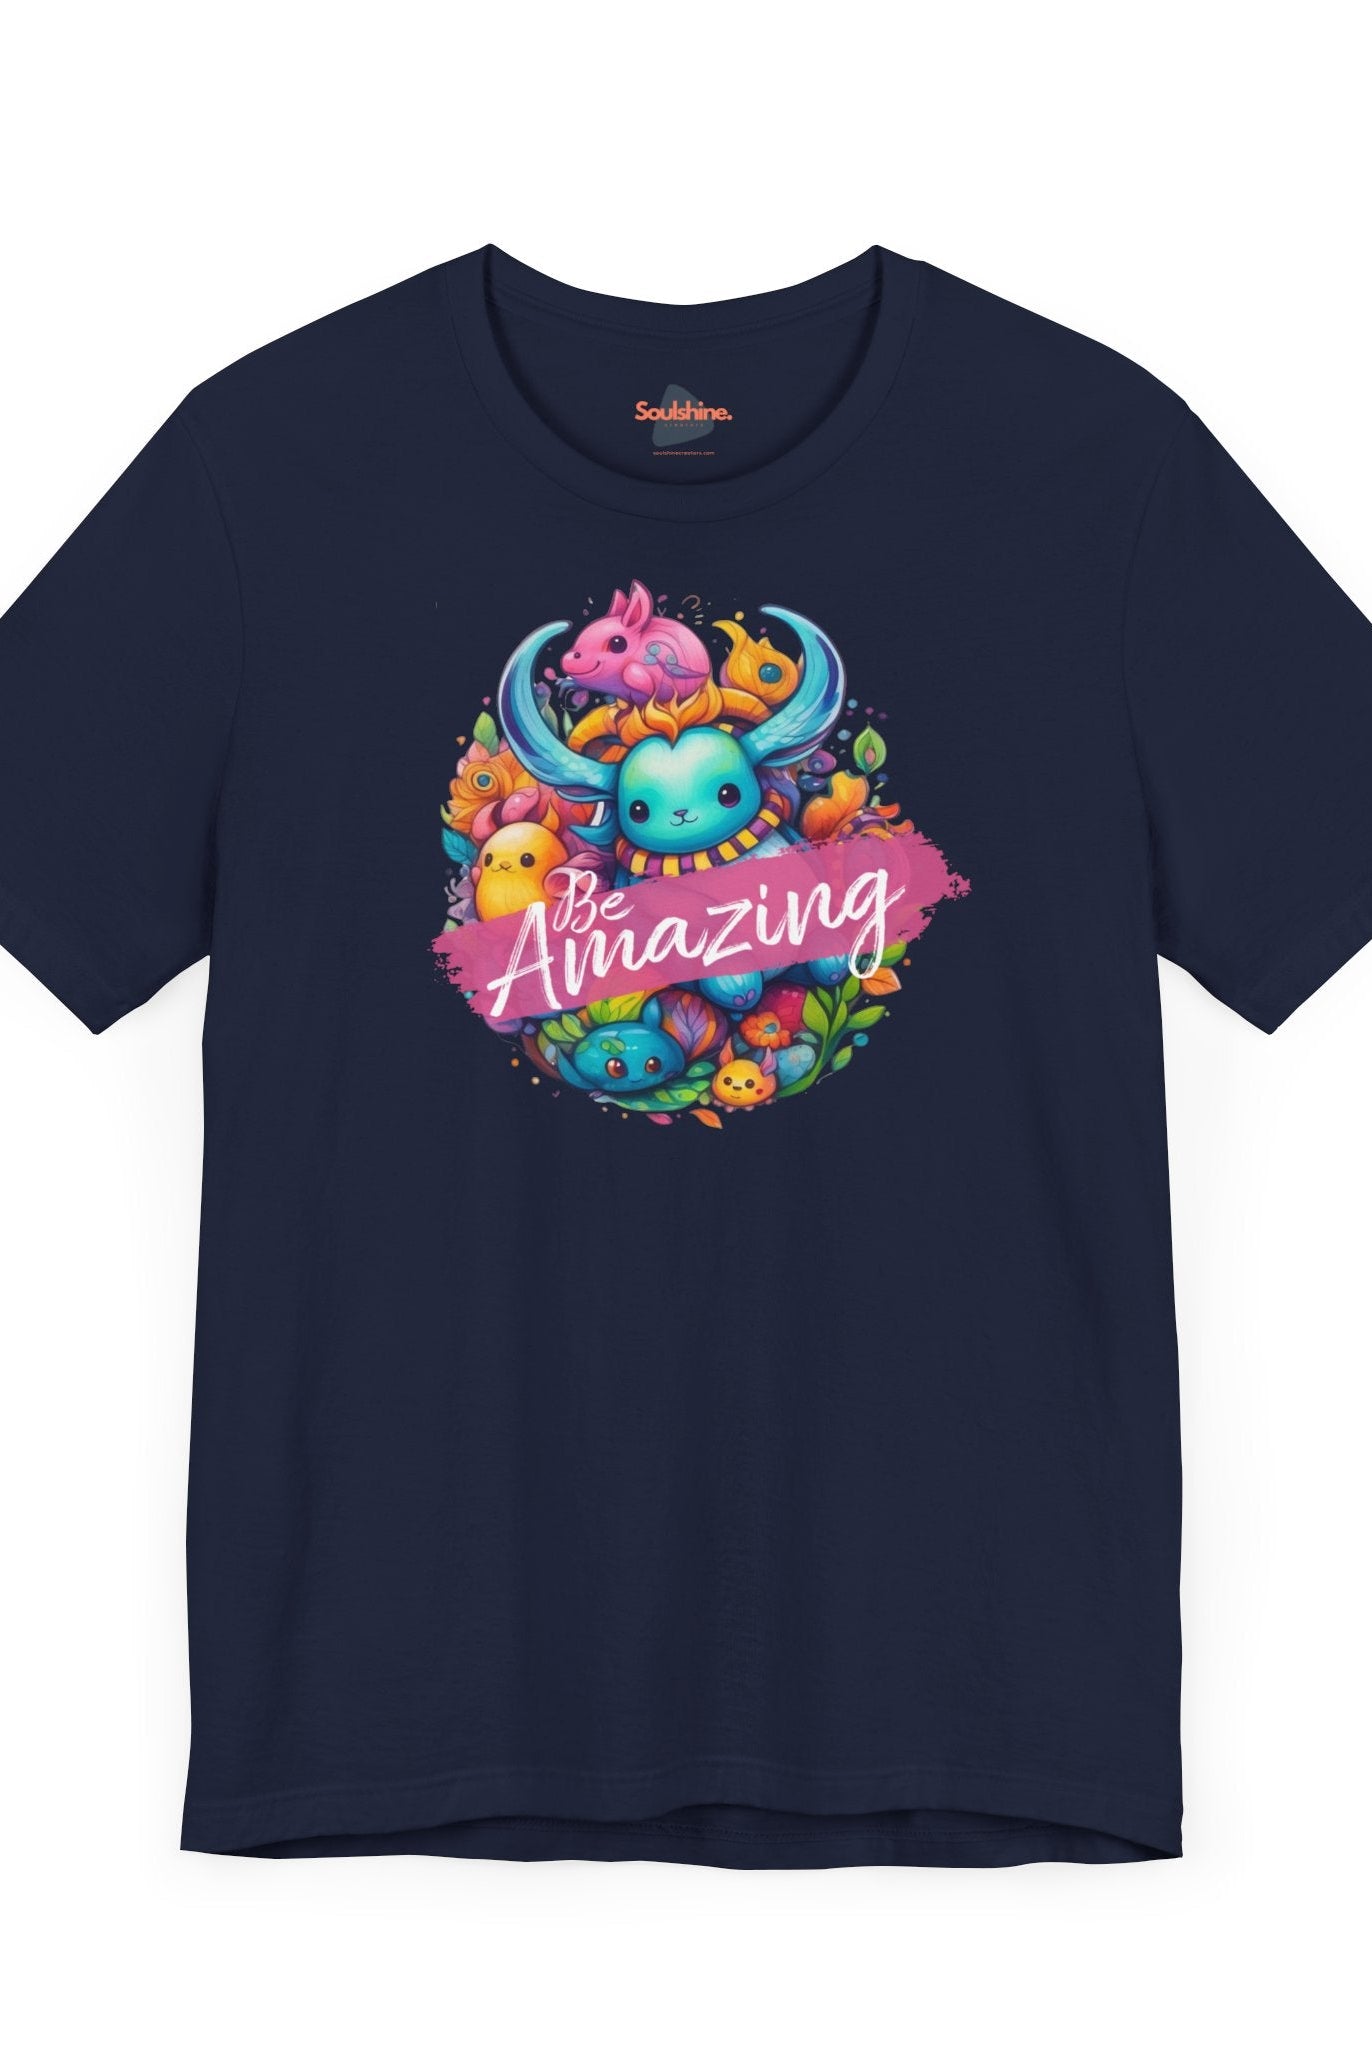 Printed navy ’Be Amazing’ T-shirt with colorful flowers by Soulshinecreators